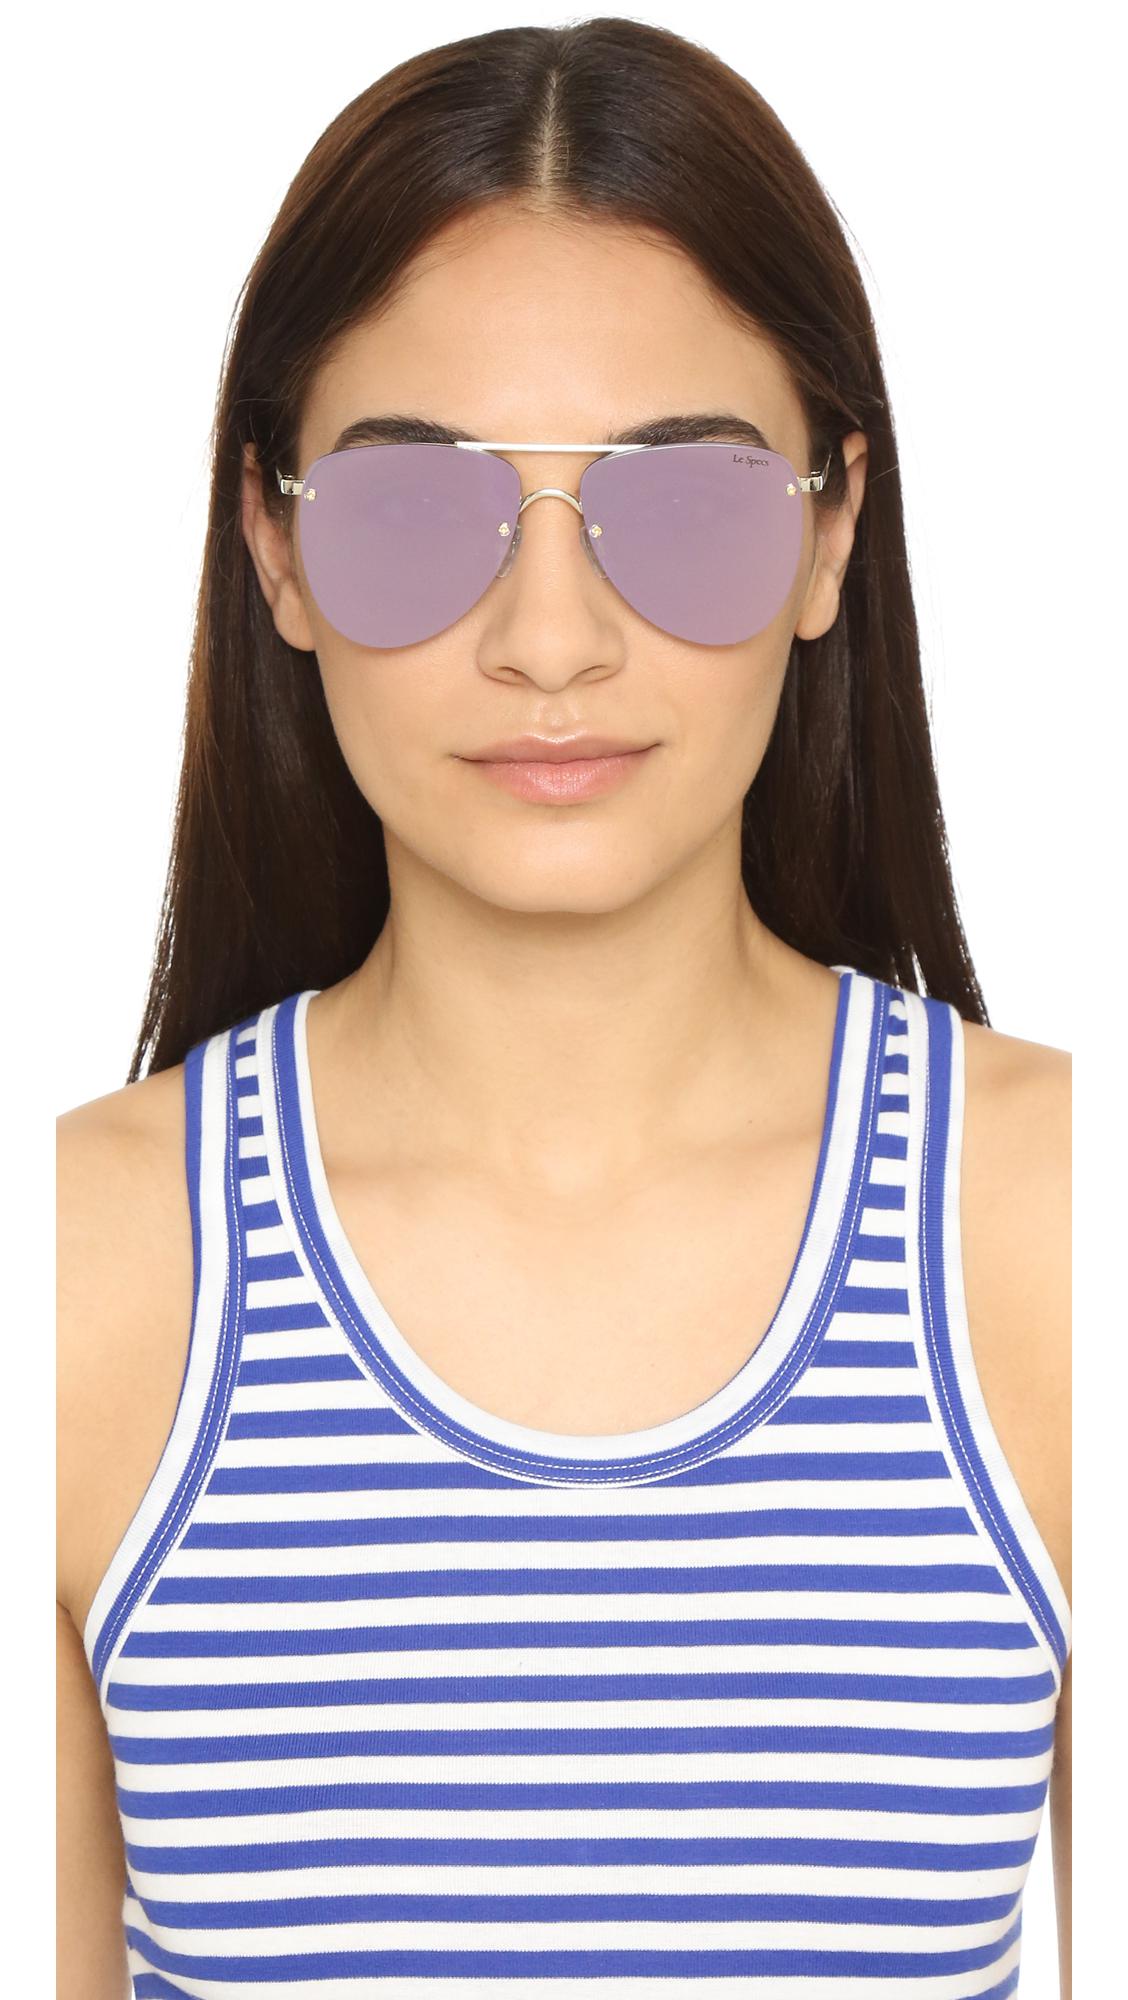 Le Specs The Prince Mirrored Sunglasses in Pink - Lyst